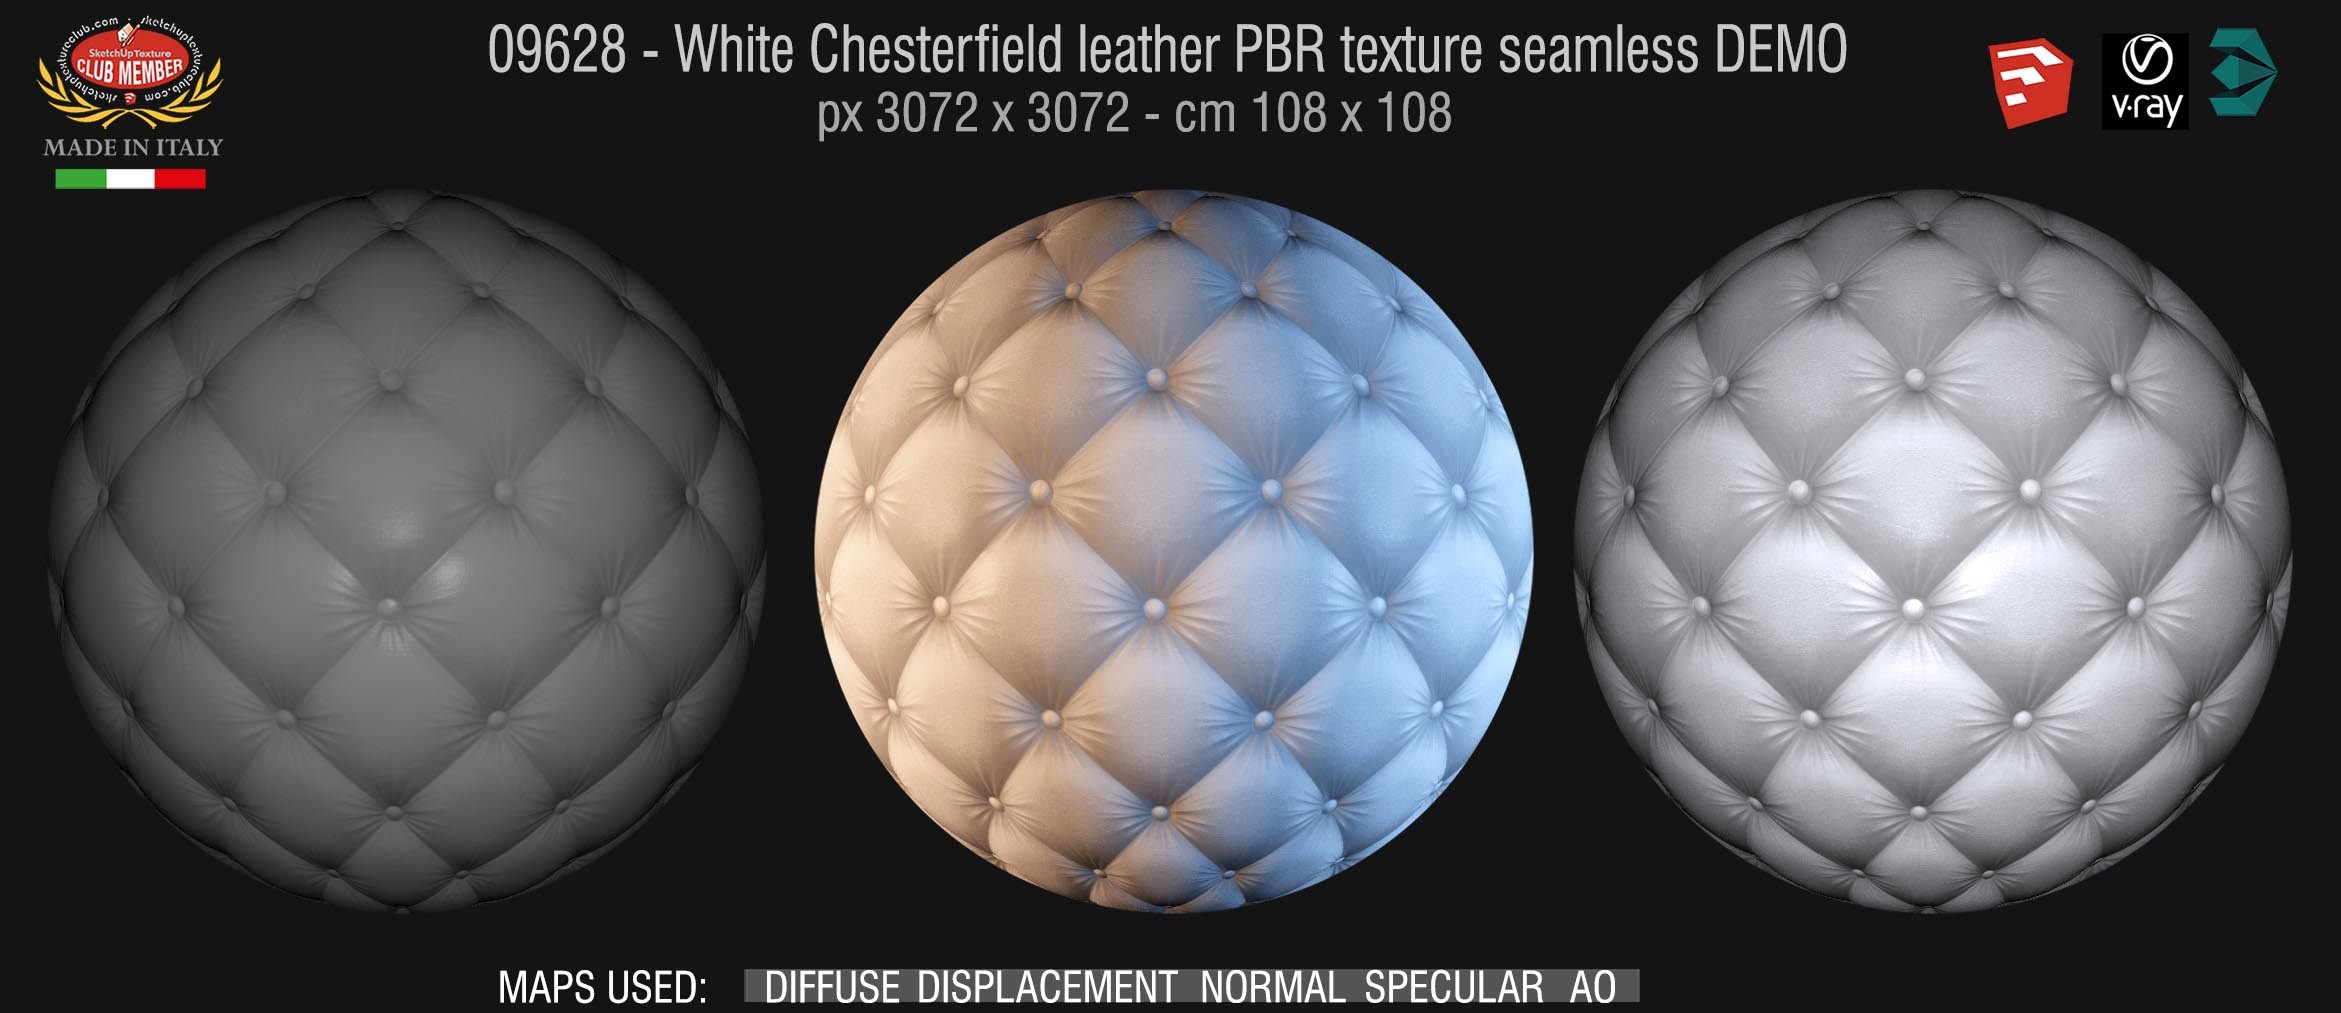 09628 White Chesterfield leather PBR texture seamless DEMO